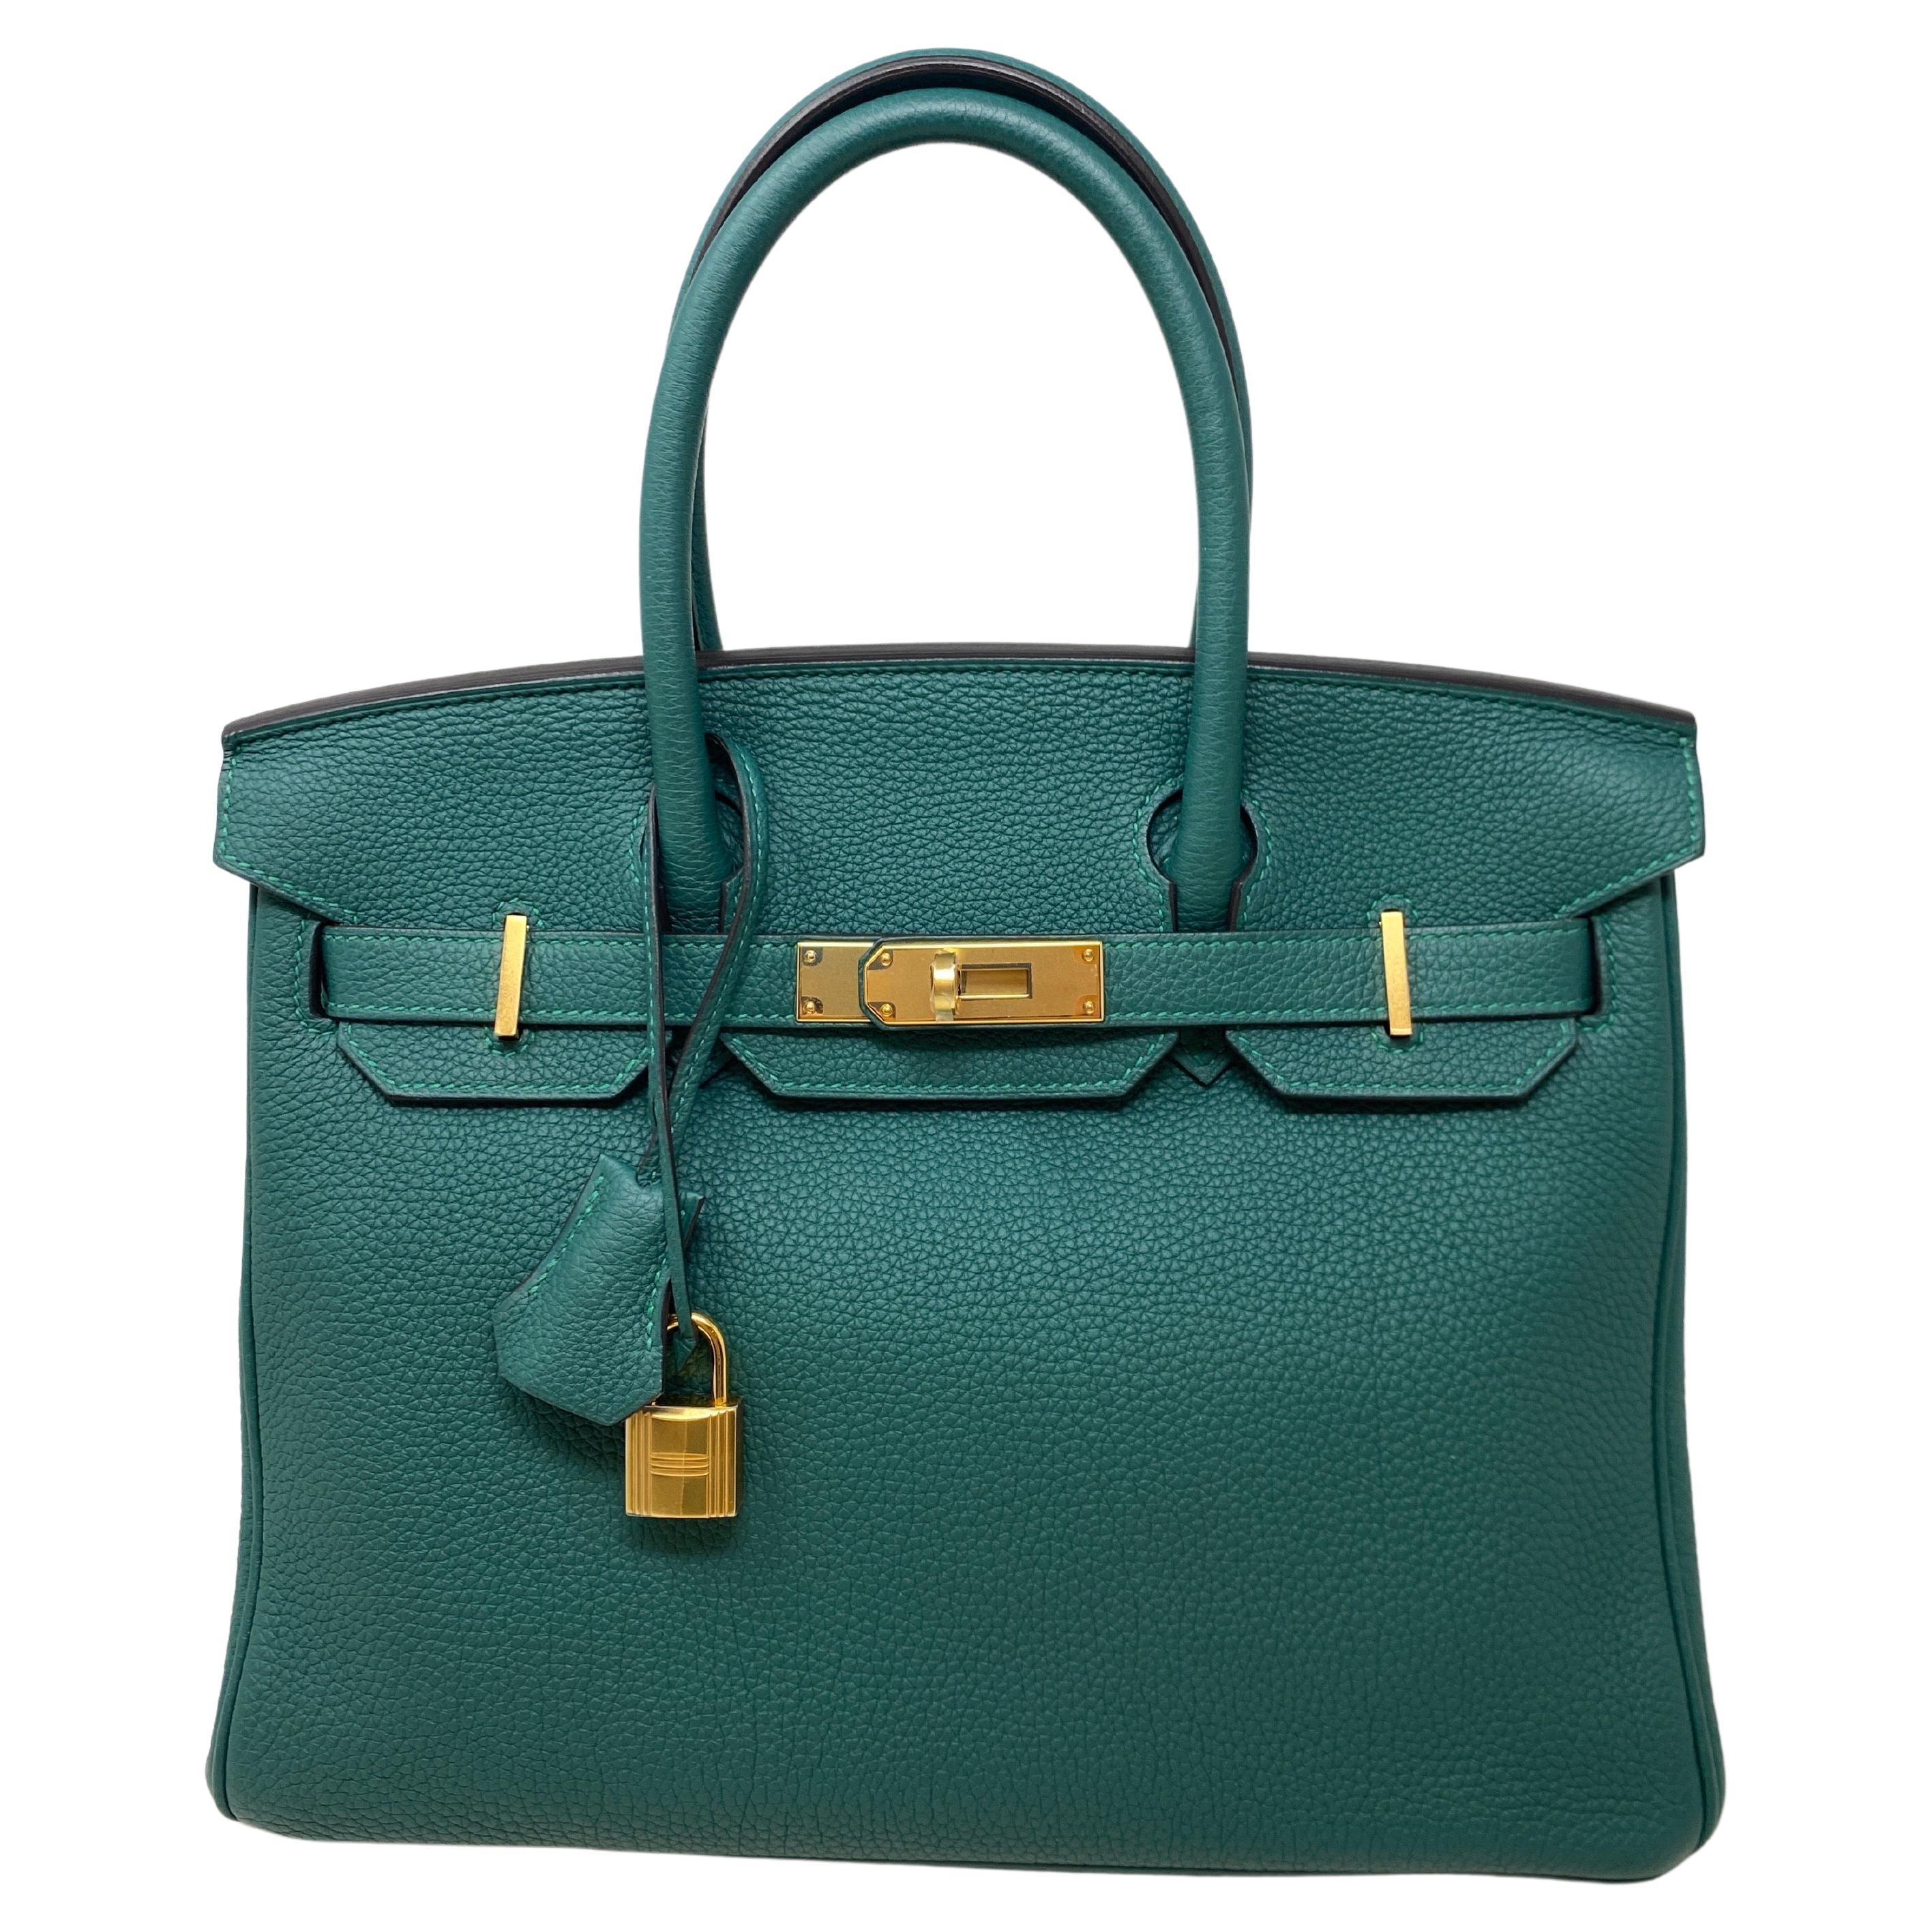 Hermes Malachite Birkin 30 Bag. Beautiful Birkin in excellent like new condition. Gold hardware. Plastic is still on hardware. Newer bag. Rare green malacite color. Don't miss out on this one. Includes clochette, lock, keys, and dust bag. Guaranteed